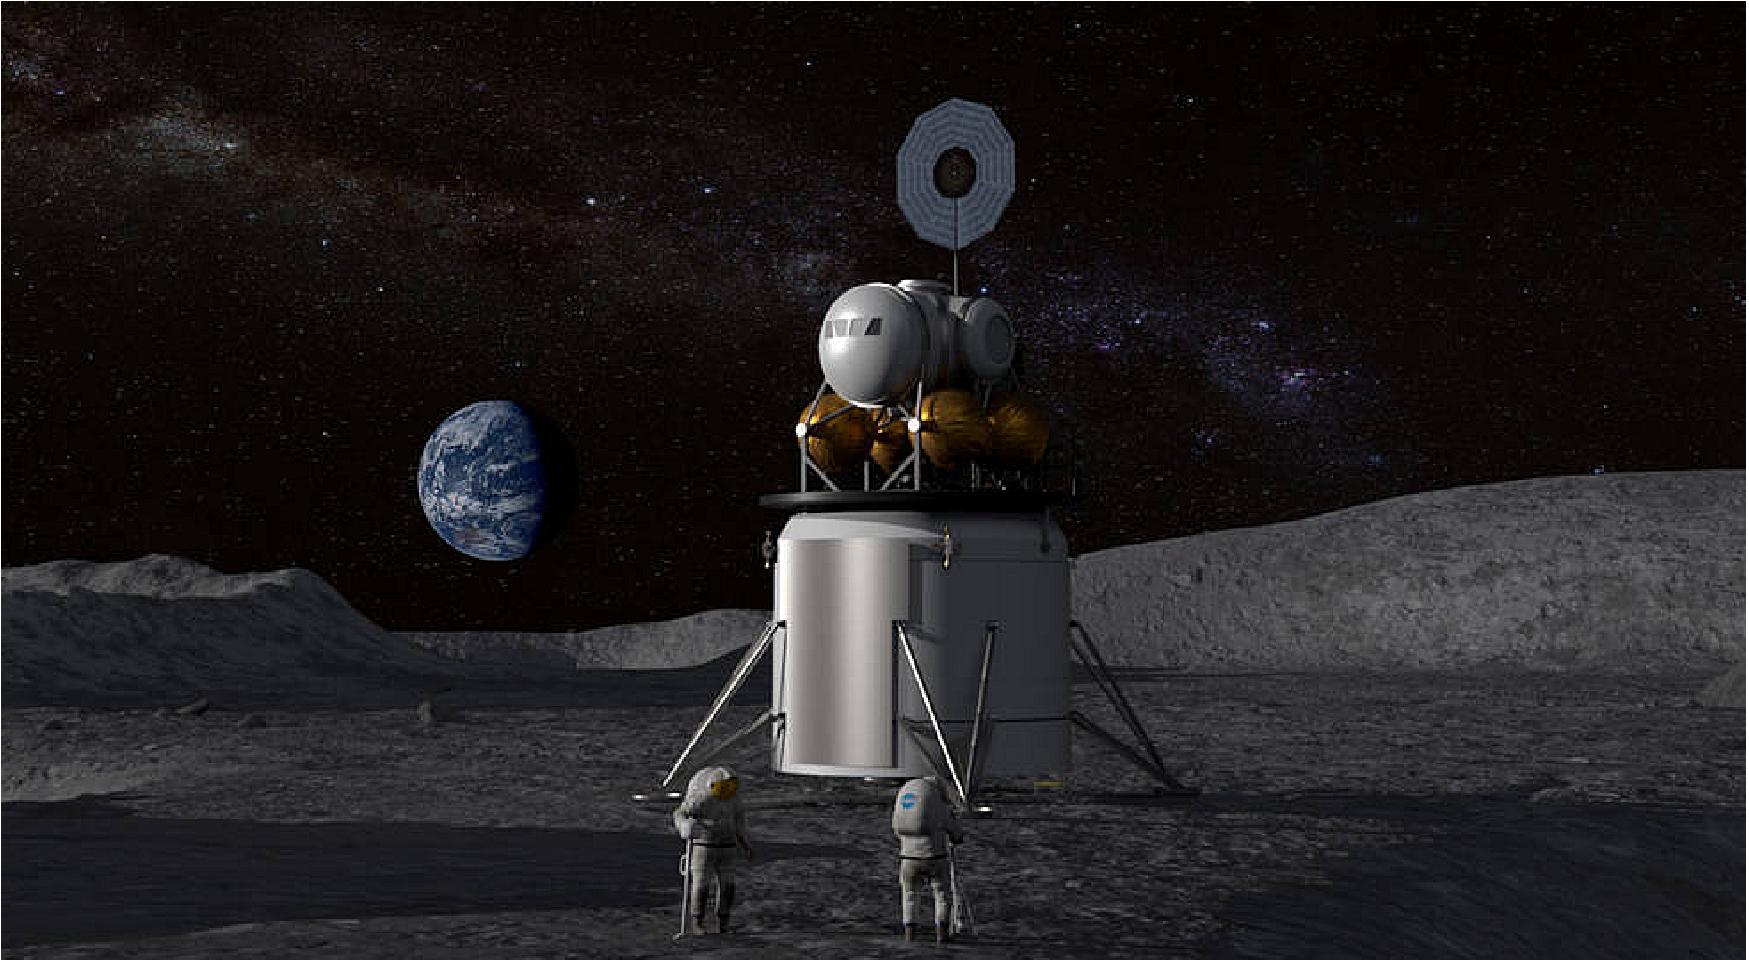 Figure 4: Illustration of a human landing system and crew on the lunar surface with Earth near the horizon (image credit: NASA)